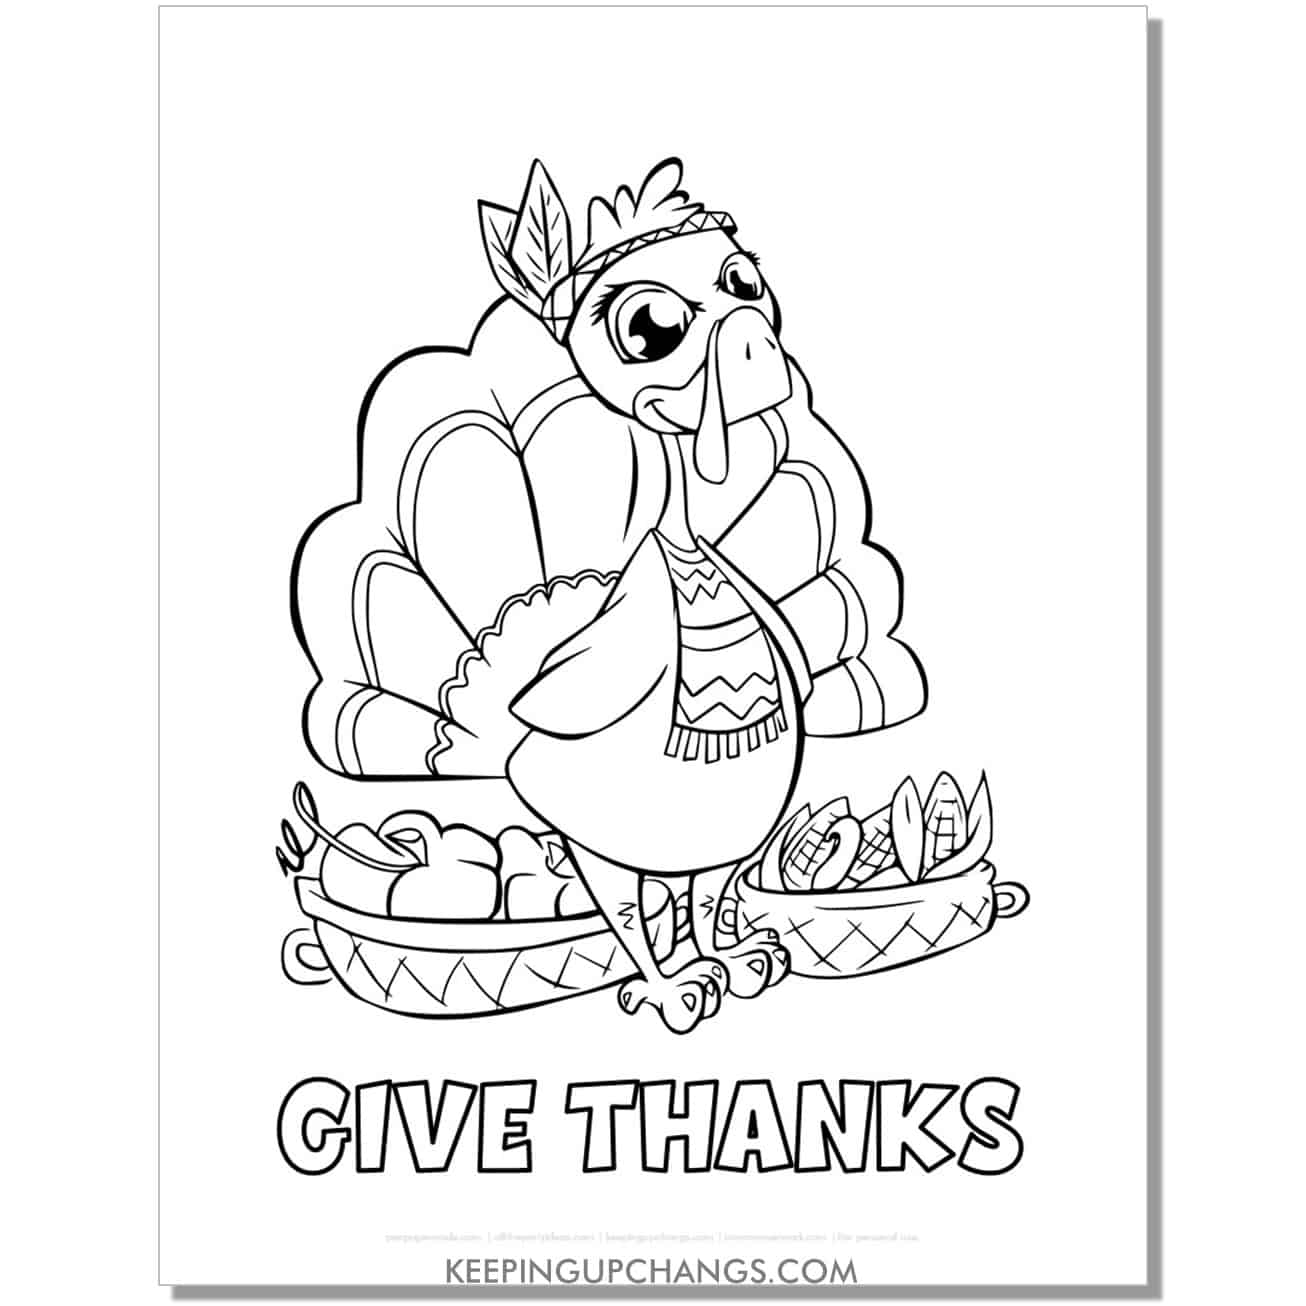 Free thanksgiving coloring pages sheets most popular printables